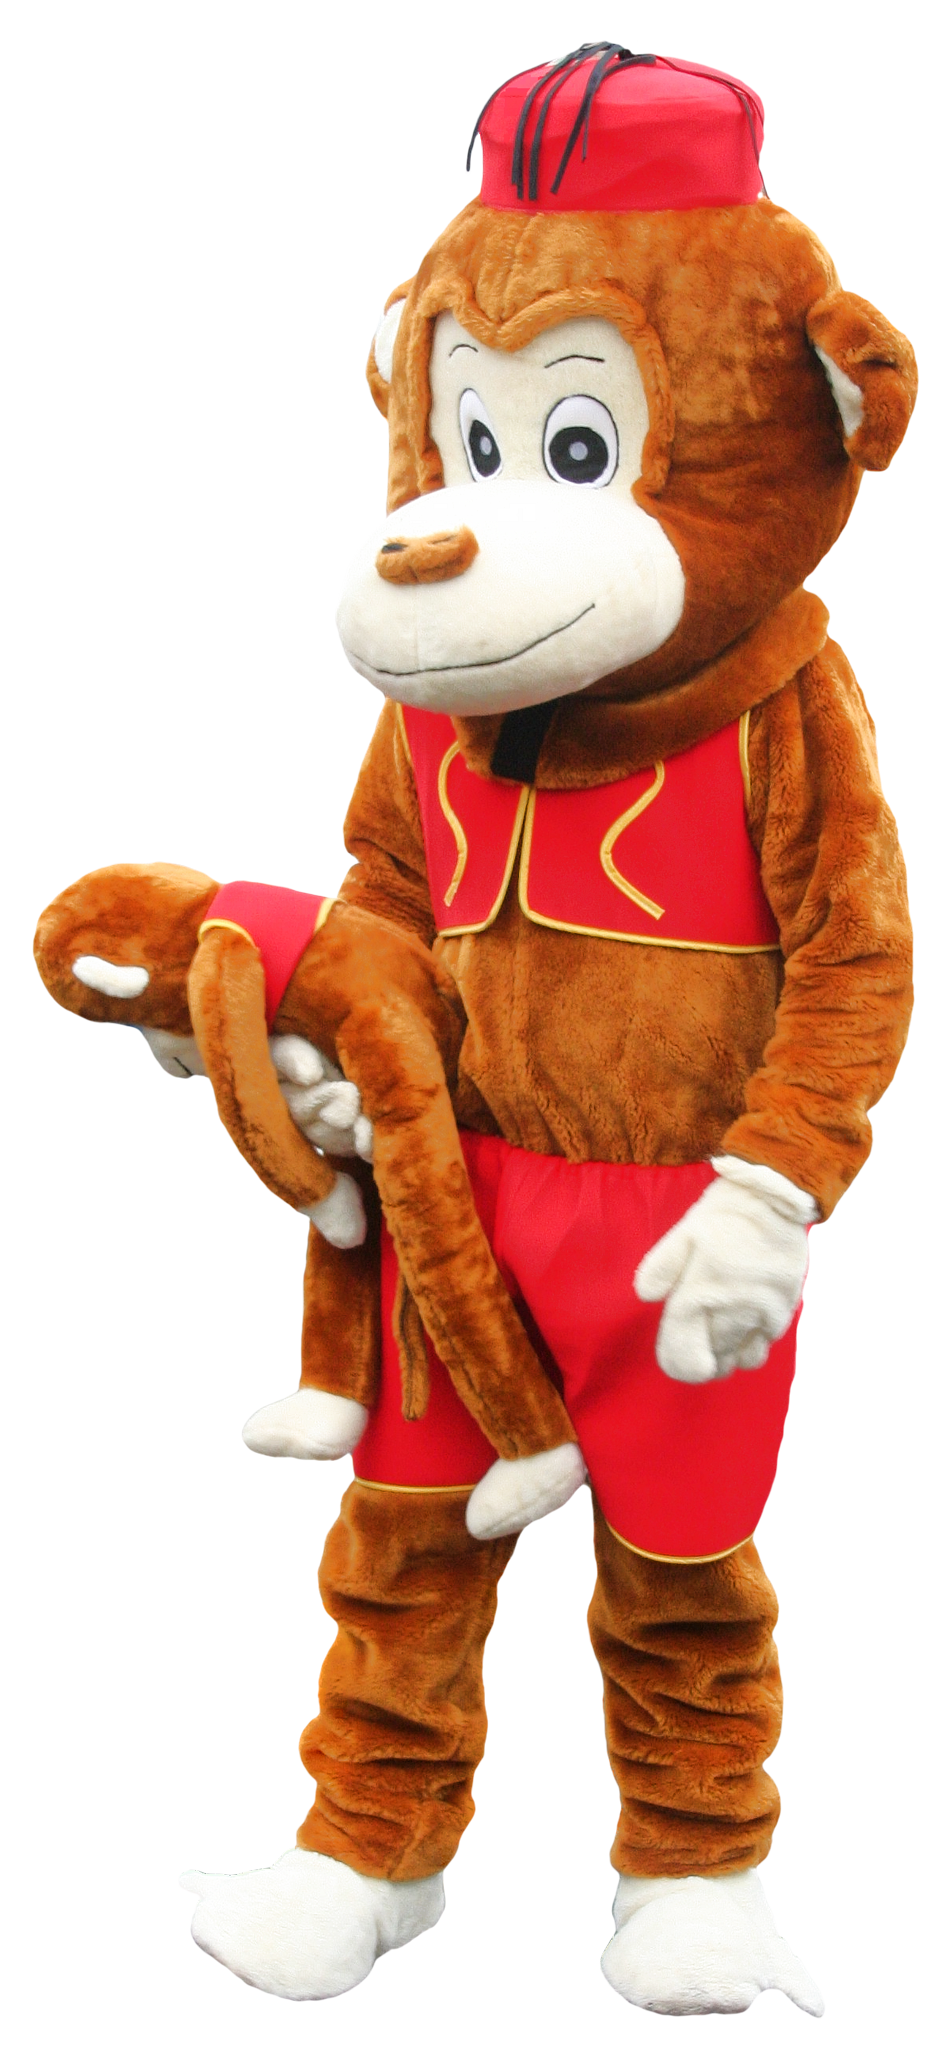 Monkey Toy PNG Image